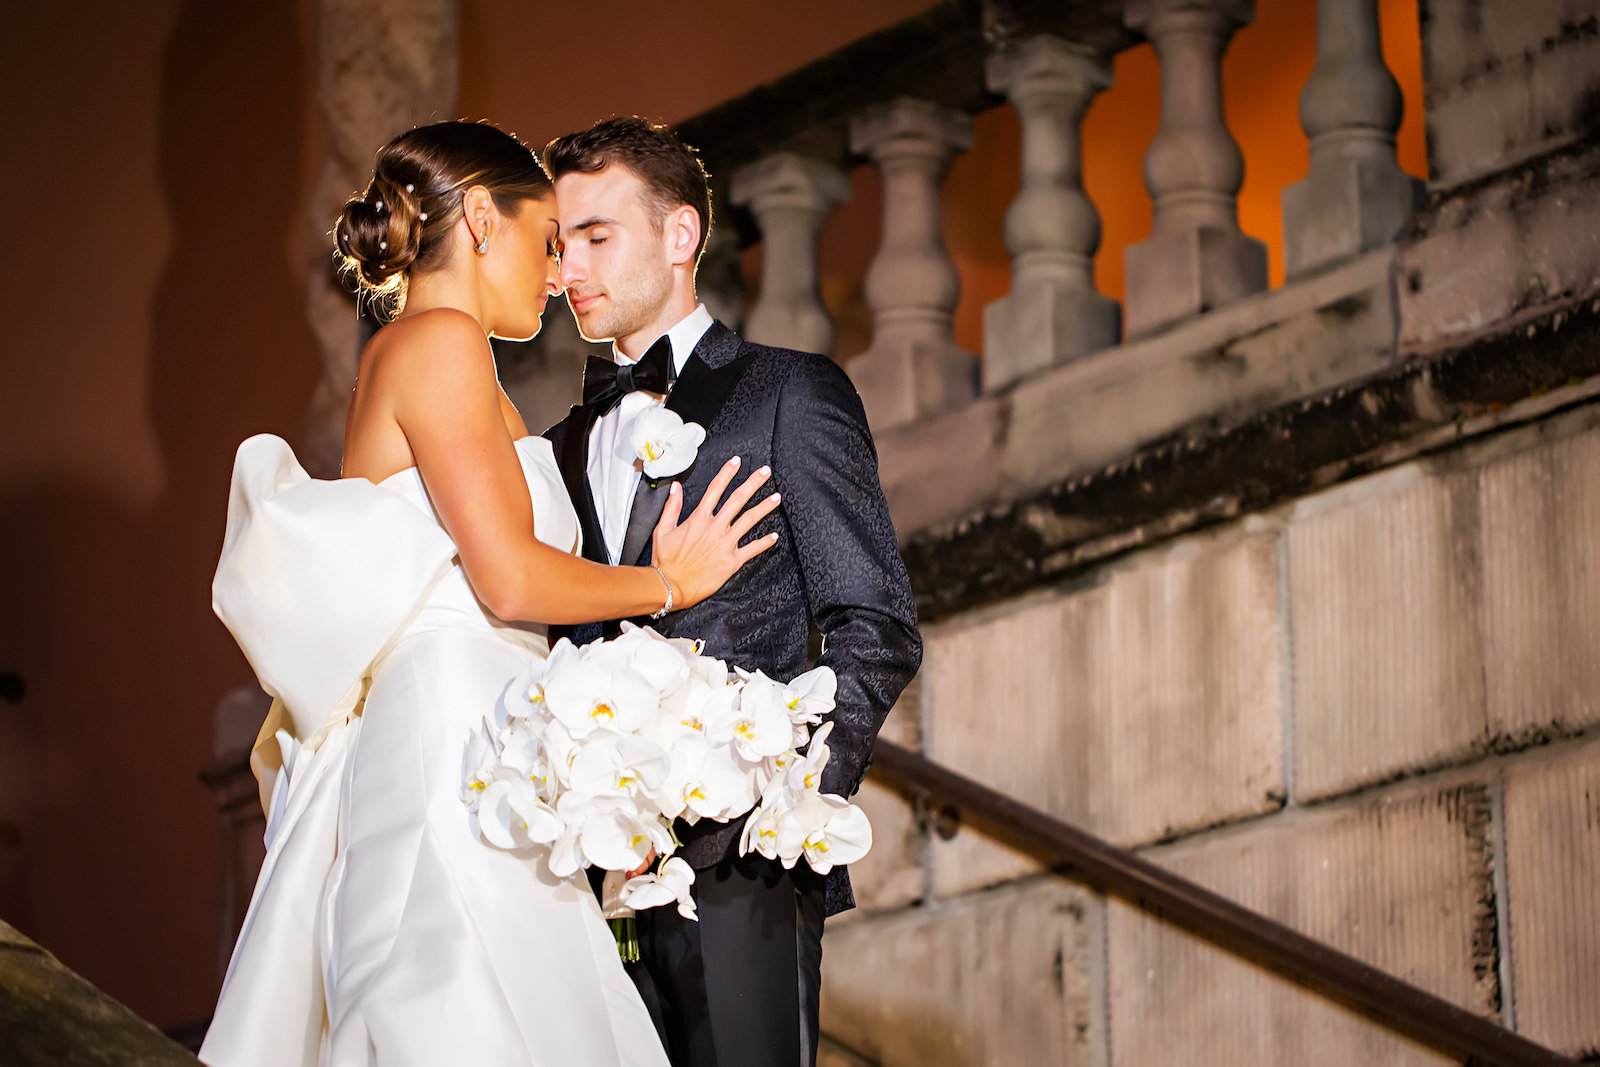 Luxurious Modern Chic Bride and Groom Wedding Portrait | Tampa Bay Wedding Photographer Limelight Photography